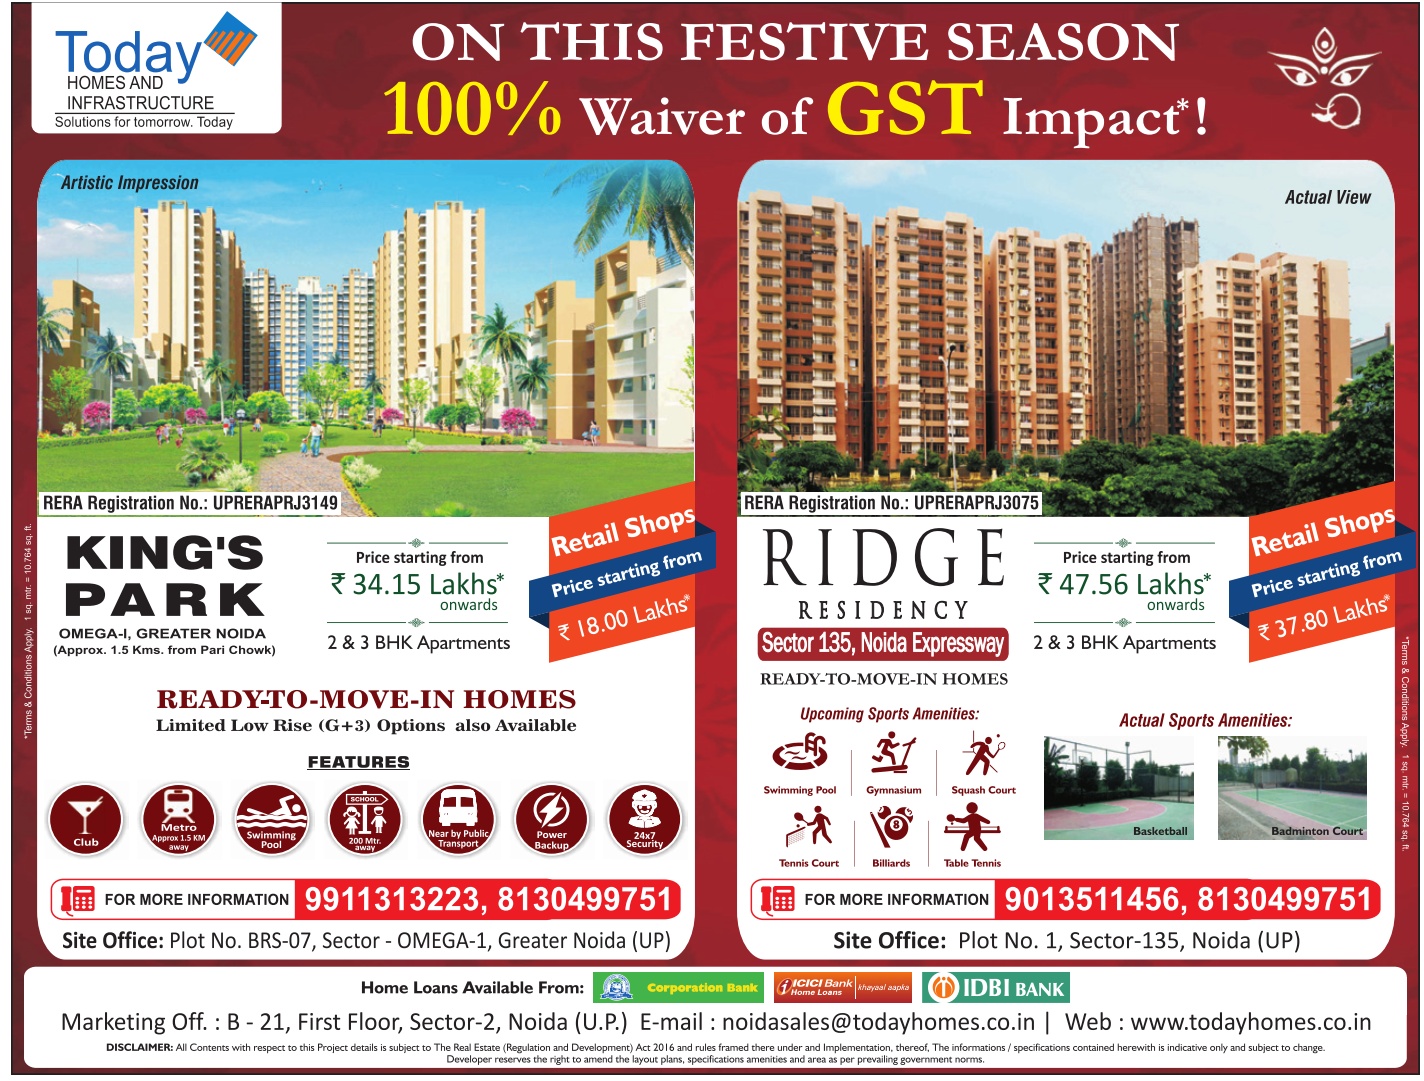 Today Homes And Infrastructure On This Festive Season 100% Waiver On ...